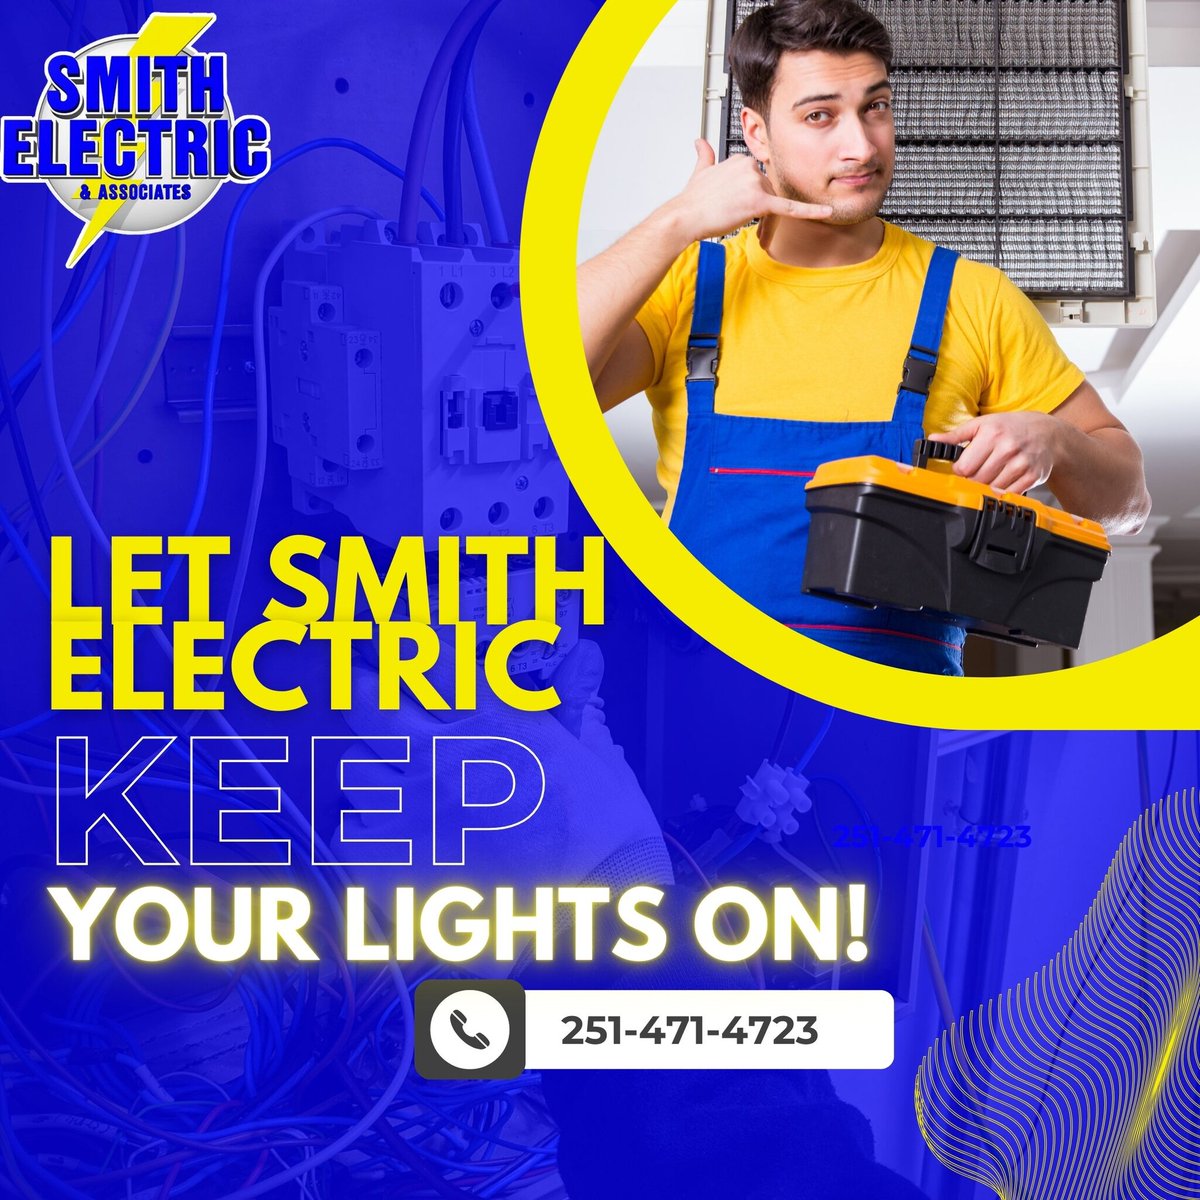 Lights out? No problem! Our team specializes in troubleshooting and repair for residential and commercial properties. Don't let electrical issues disrupt your day – call Smith Electric for reliable service! #ElectricalRepair #TroubleshootingExperts